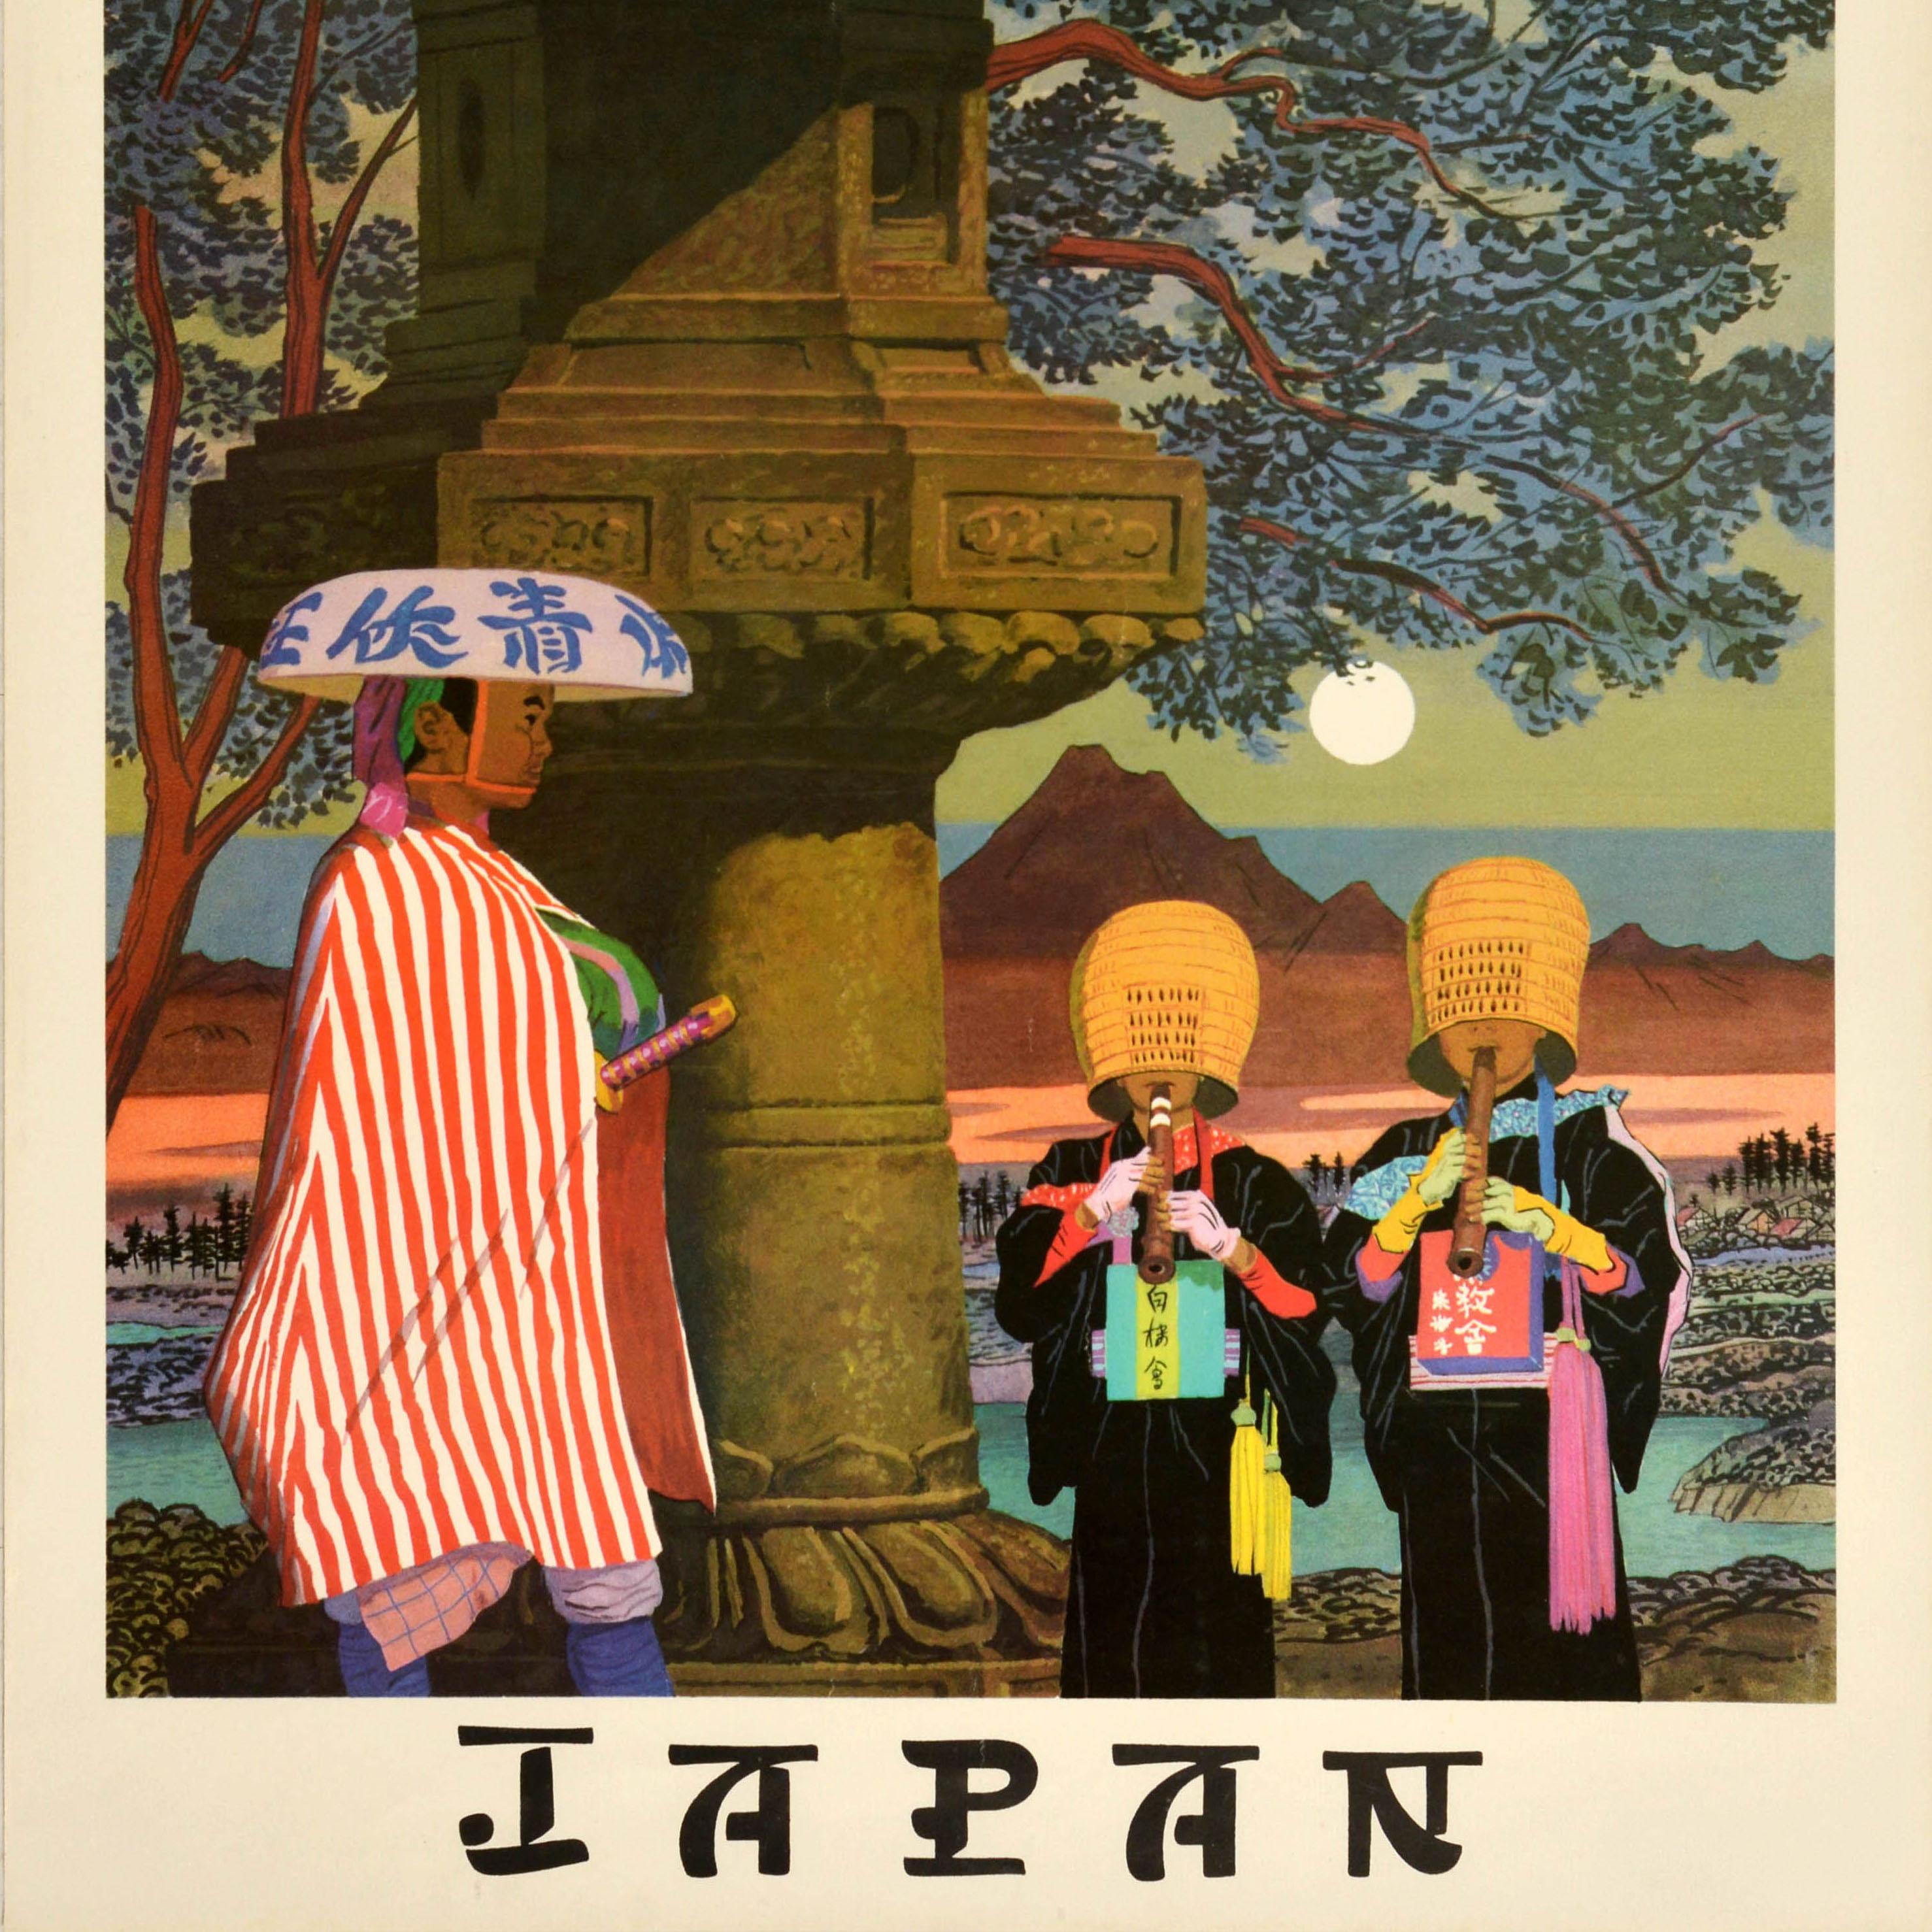 Original vintage travel advertising poster for Japan featuring a great image of a person wearing a traditional bamboo woven Sandogasa Ronin Samurai hat carrying a sword under his red and white cloak walking by two Komuso Zen Buddhist monks wearing